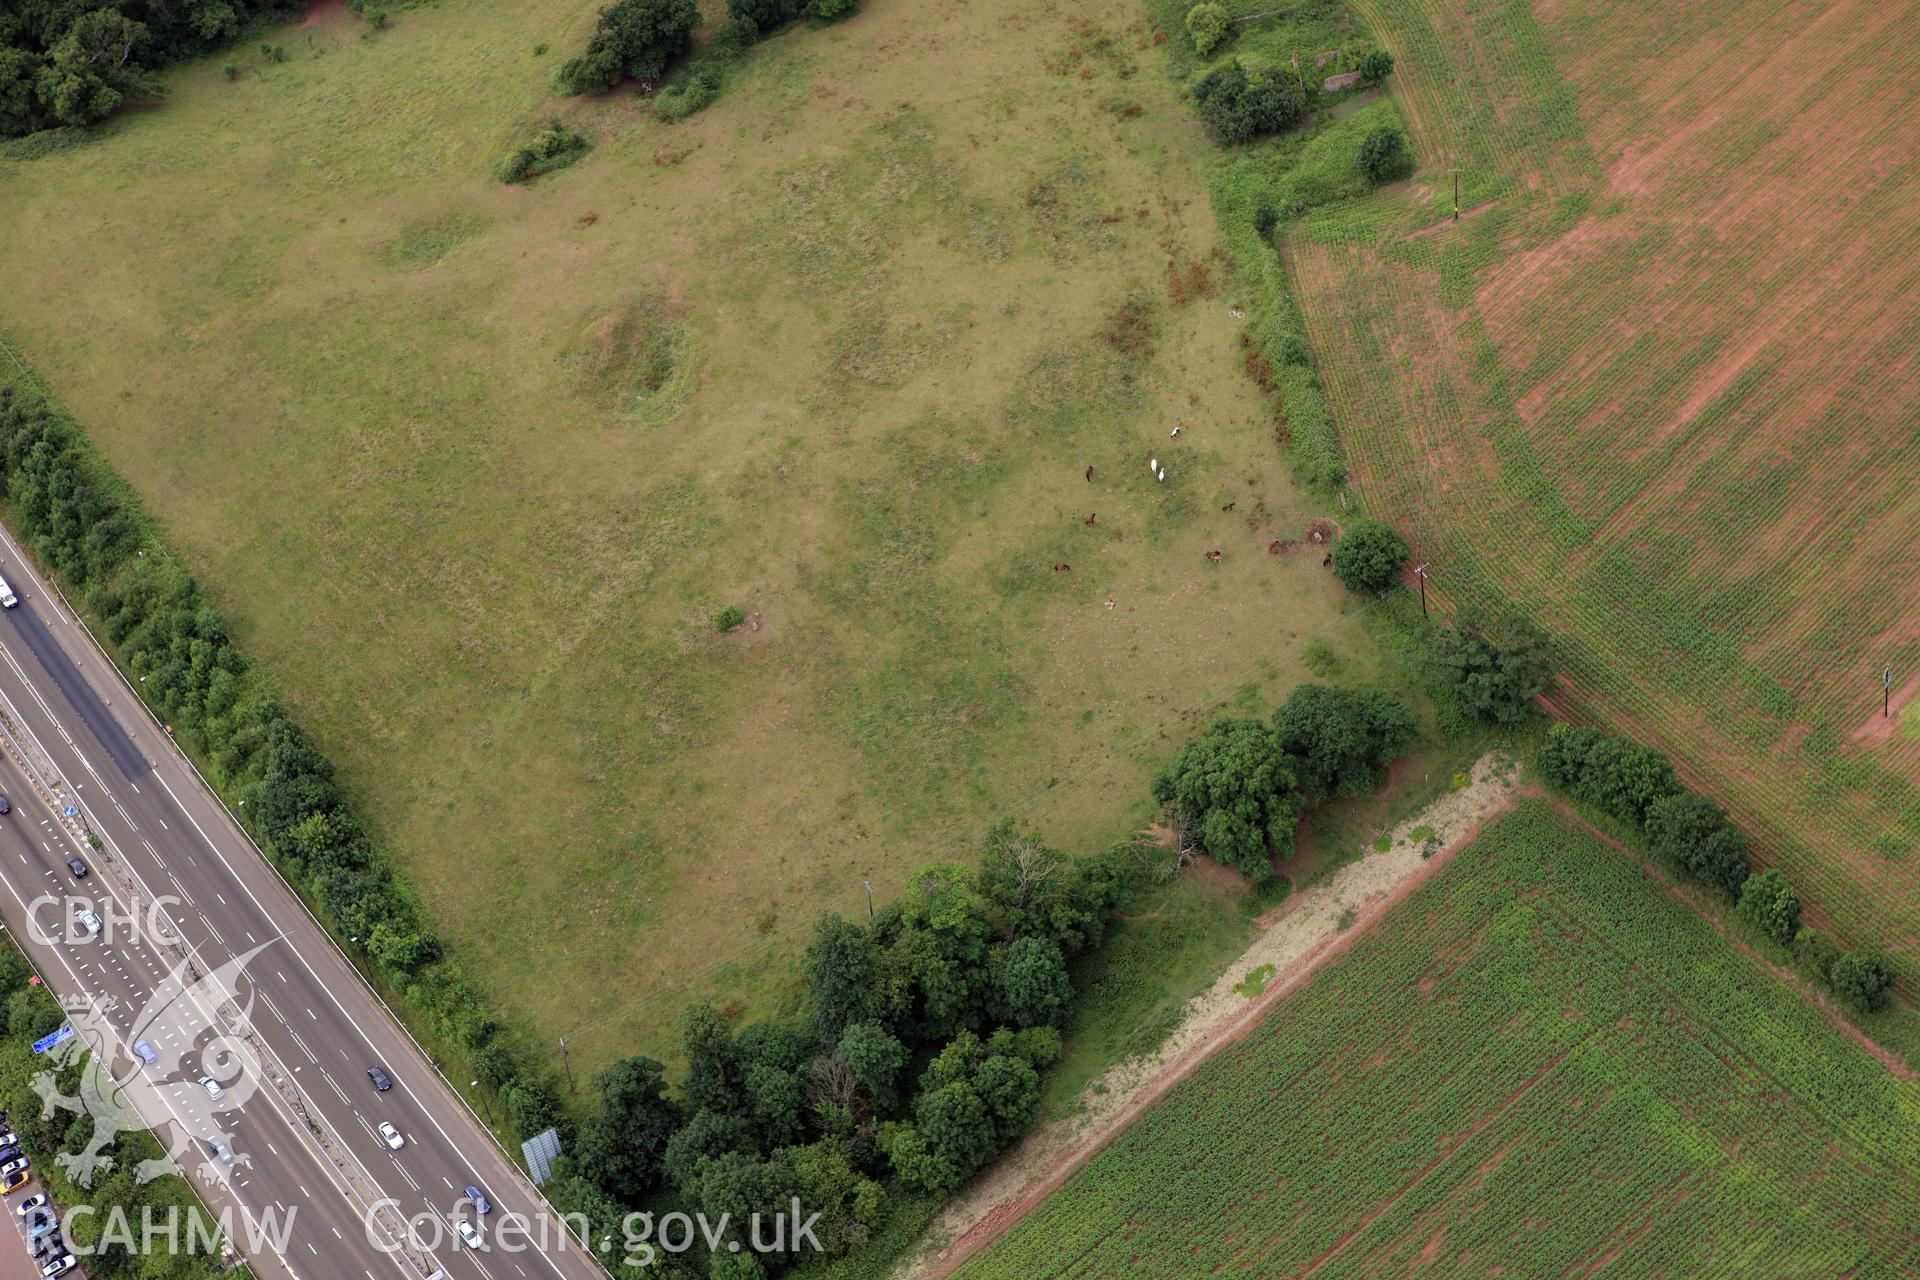 RCAHMW colour oblique aerial photograph of Gwern-y-Cleppa Long Barrow. Taken on 09 July 2009 by Toby Driver